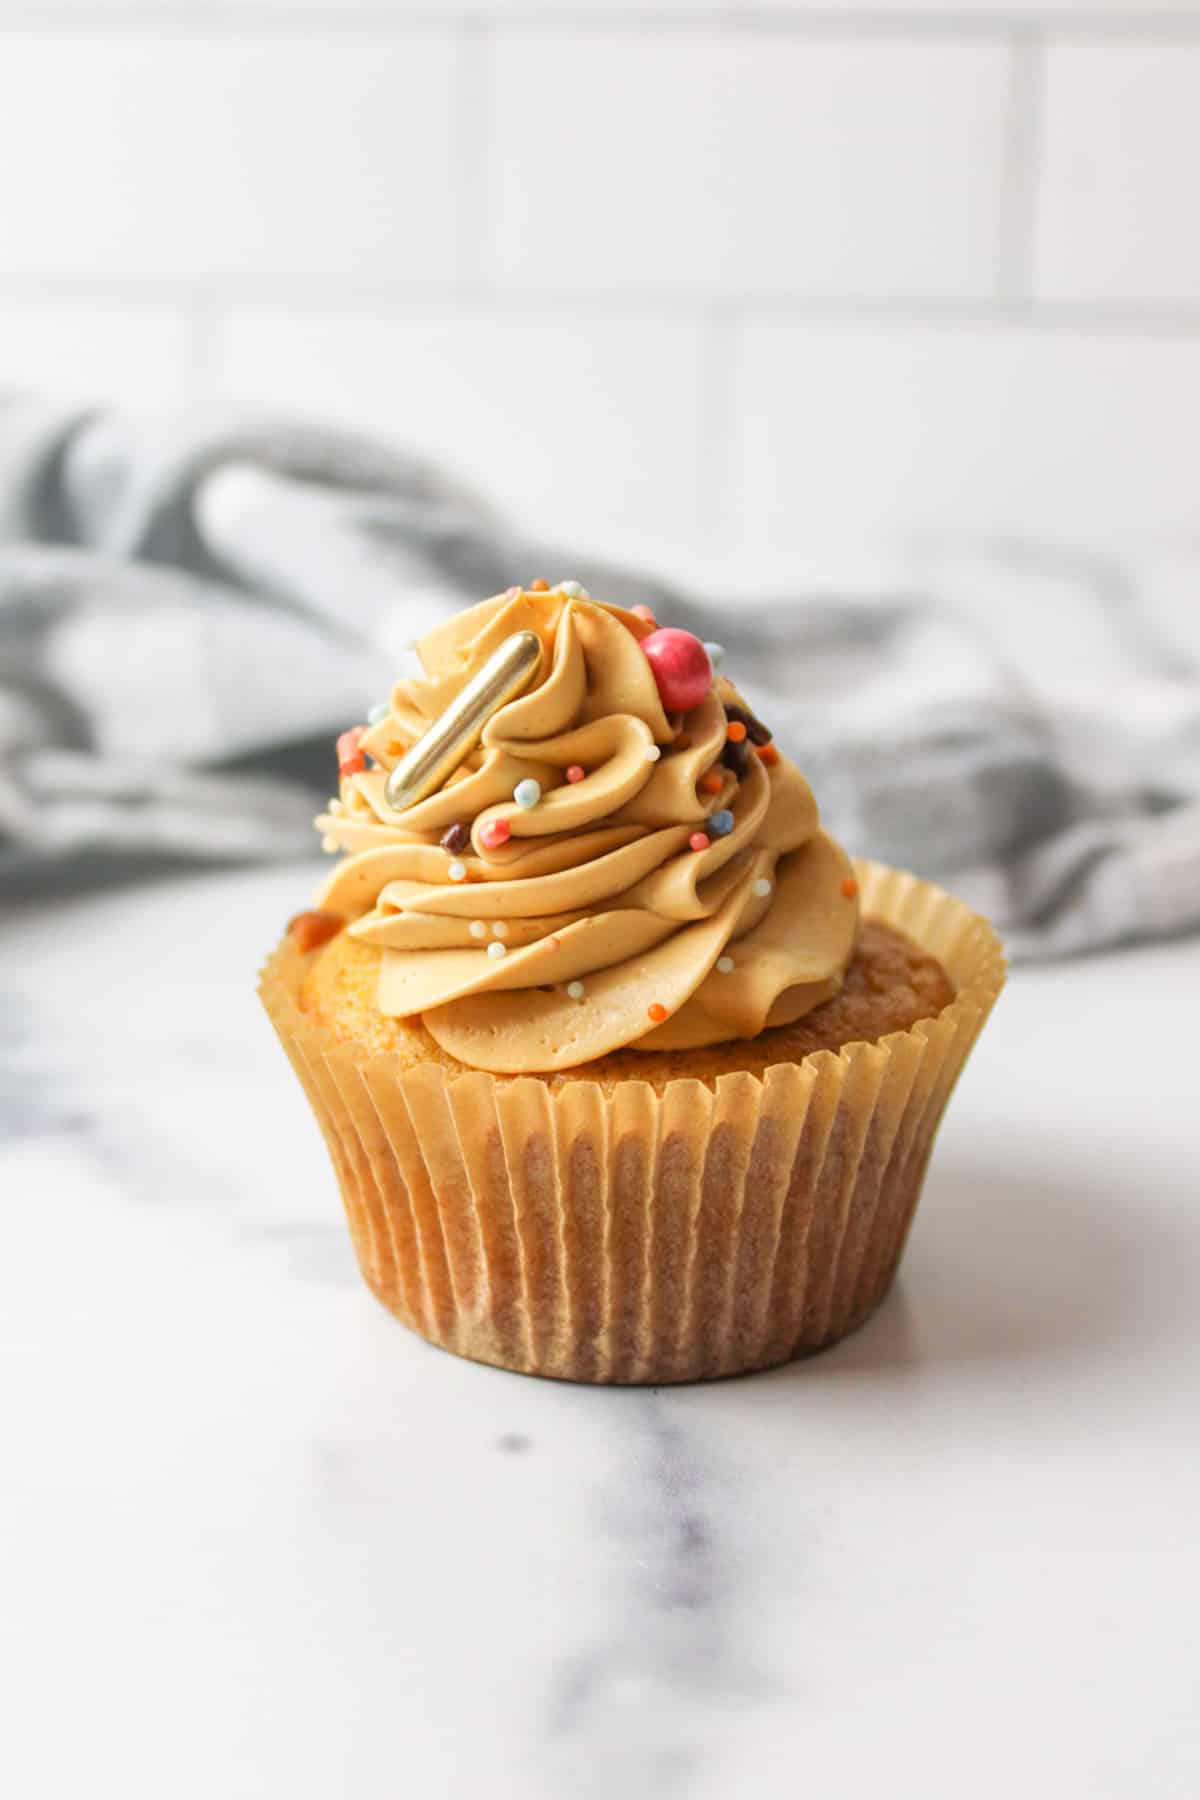 apple cider cupcake with caramel frosting and sprinkles on top.